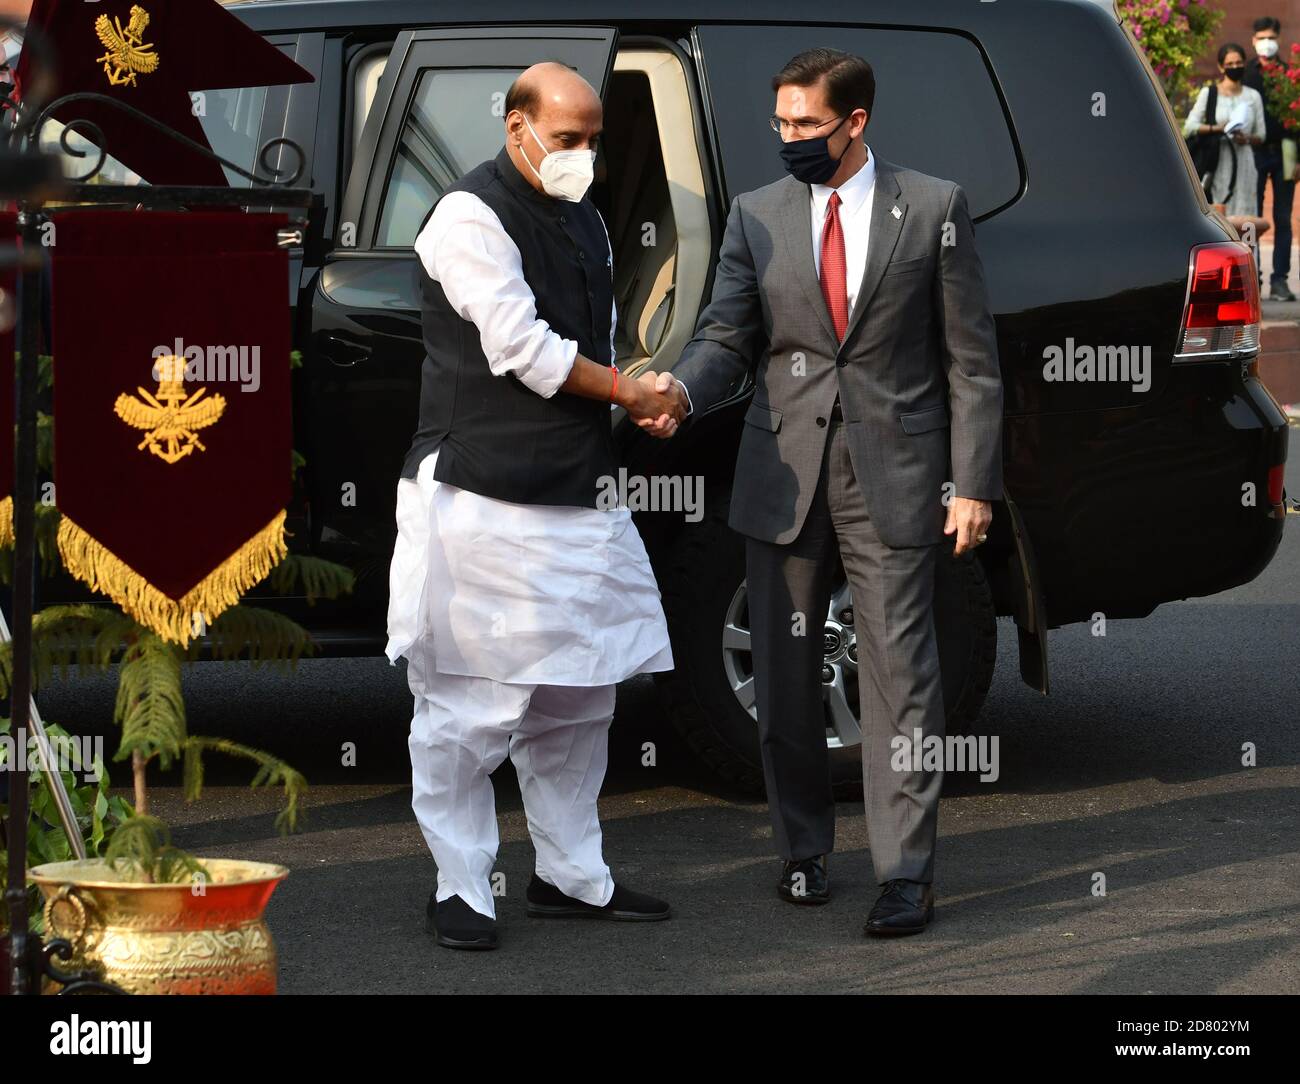 U.S. Defense Secretary Mark Esper, right, is welcomed by his Indian counterpart Rajnath Singh as he arrives at the Defense Ministry for a ceremonial guard of honor in New Delhi, India, Monday, Oct. 26, 2020. Photograph: Sondeep Shankar Stock Photo